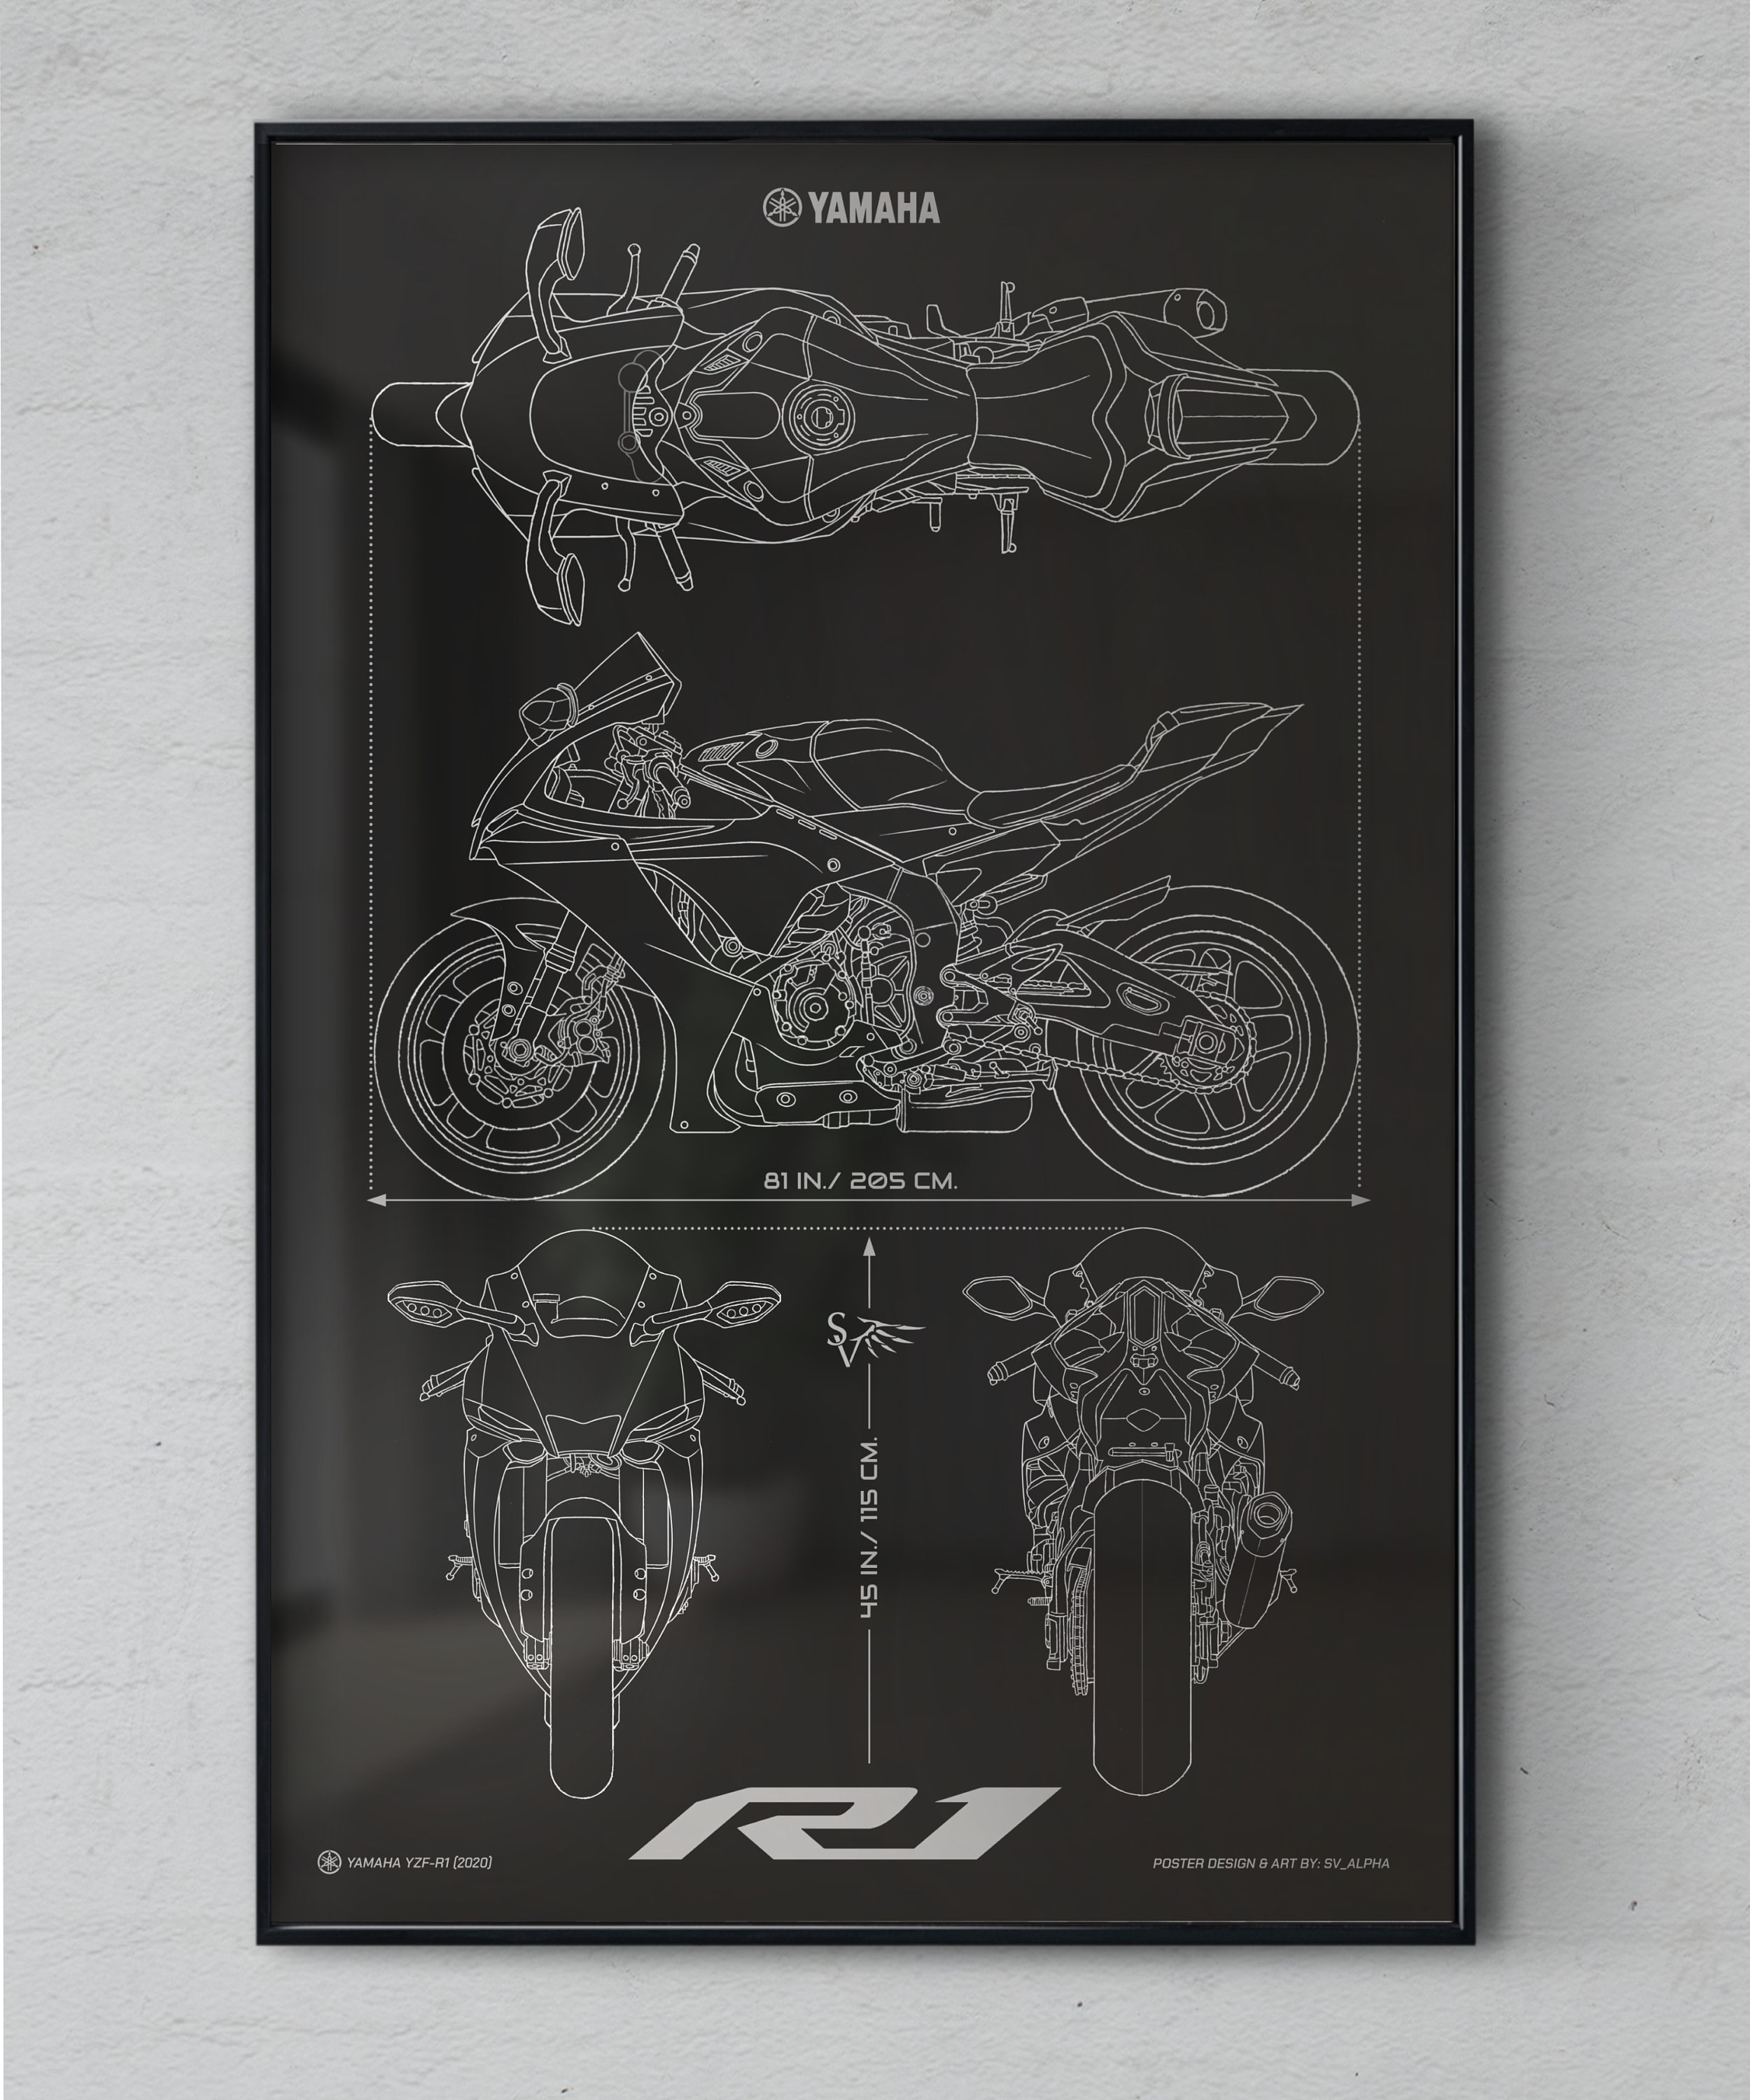 Yamaha R1 Luxury Motorcycle Speed Motorcycle Wall Art Home Decor - POSTER  20x30